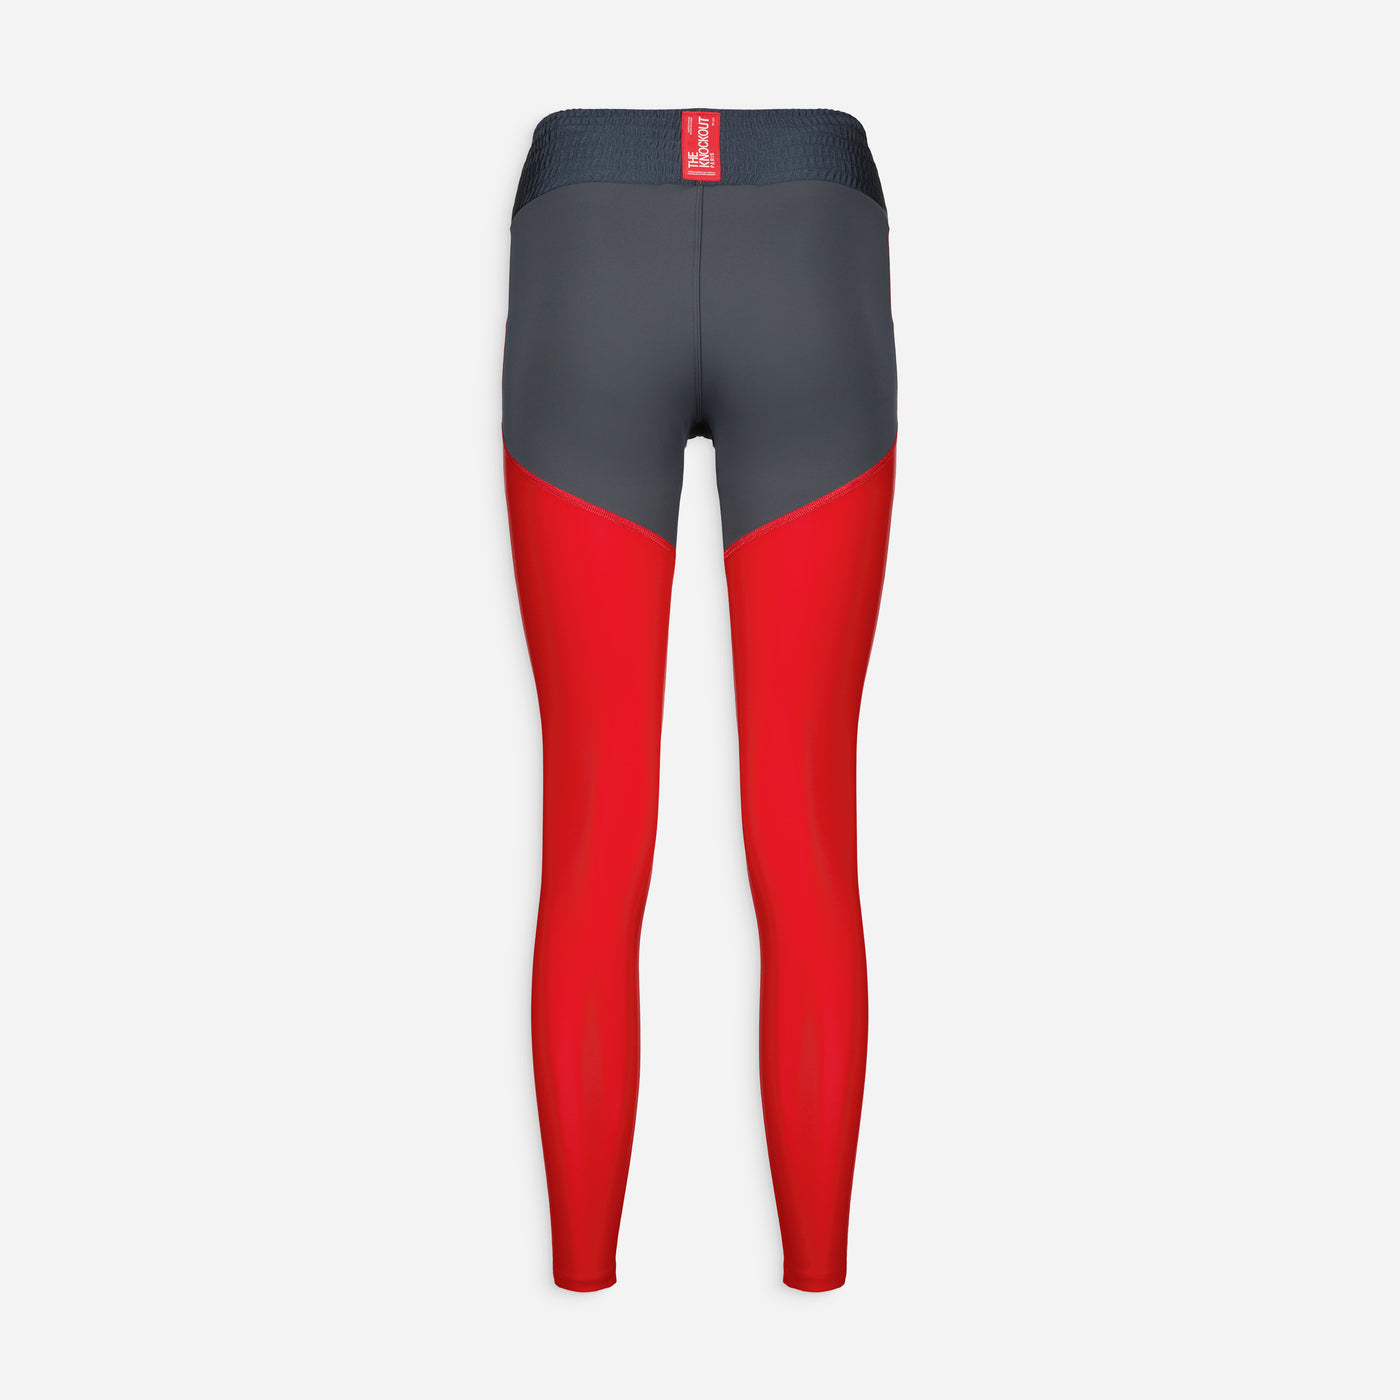 The Knockout Paris victory leggings in grey and red